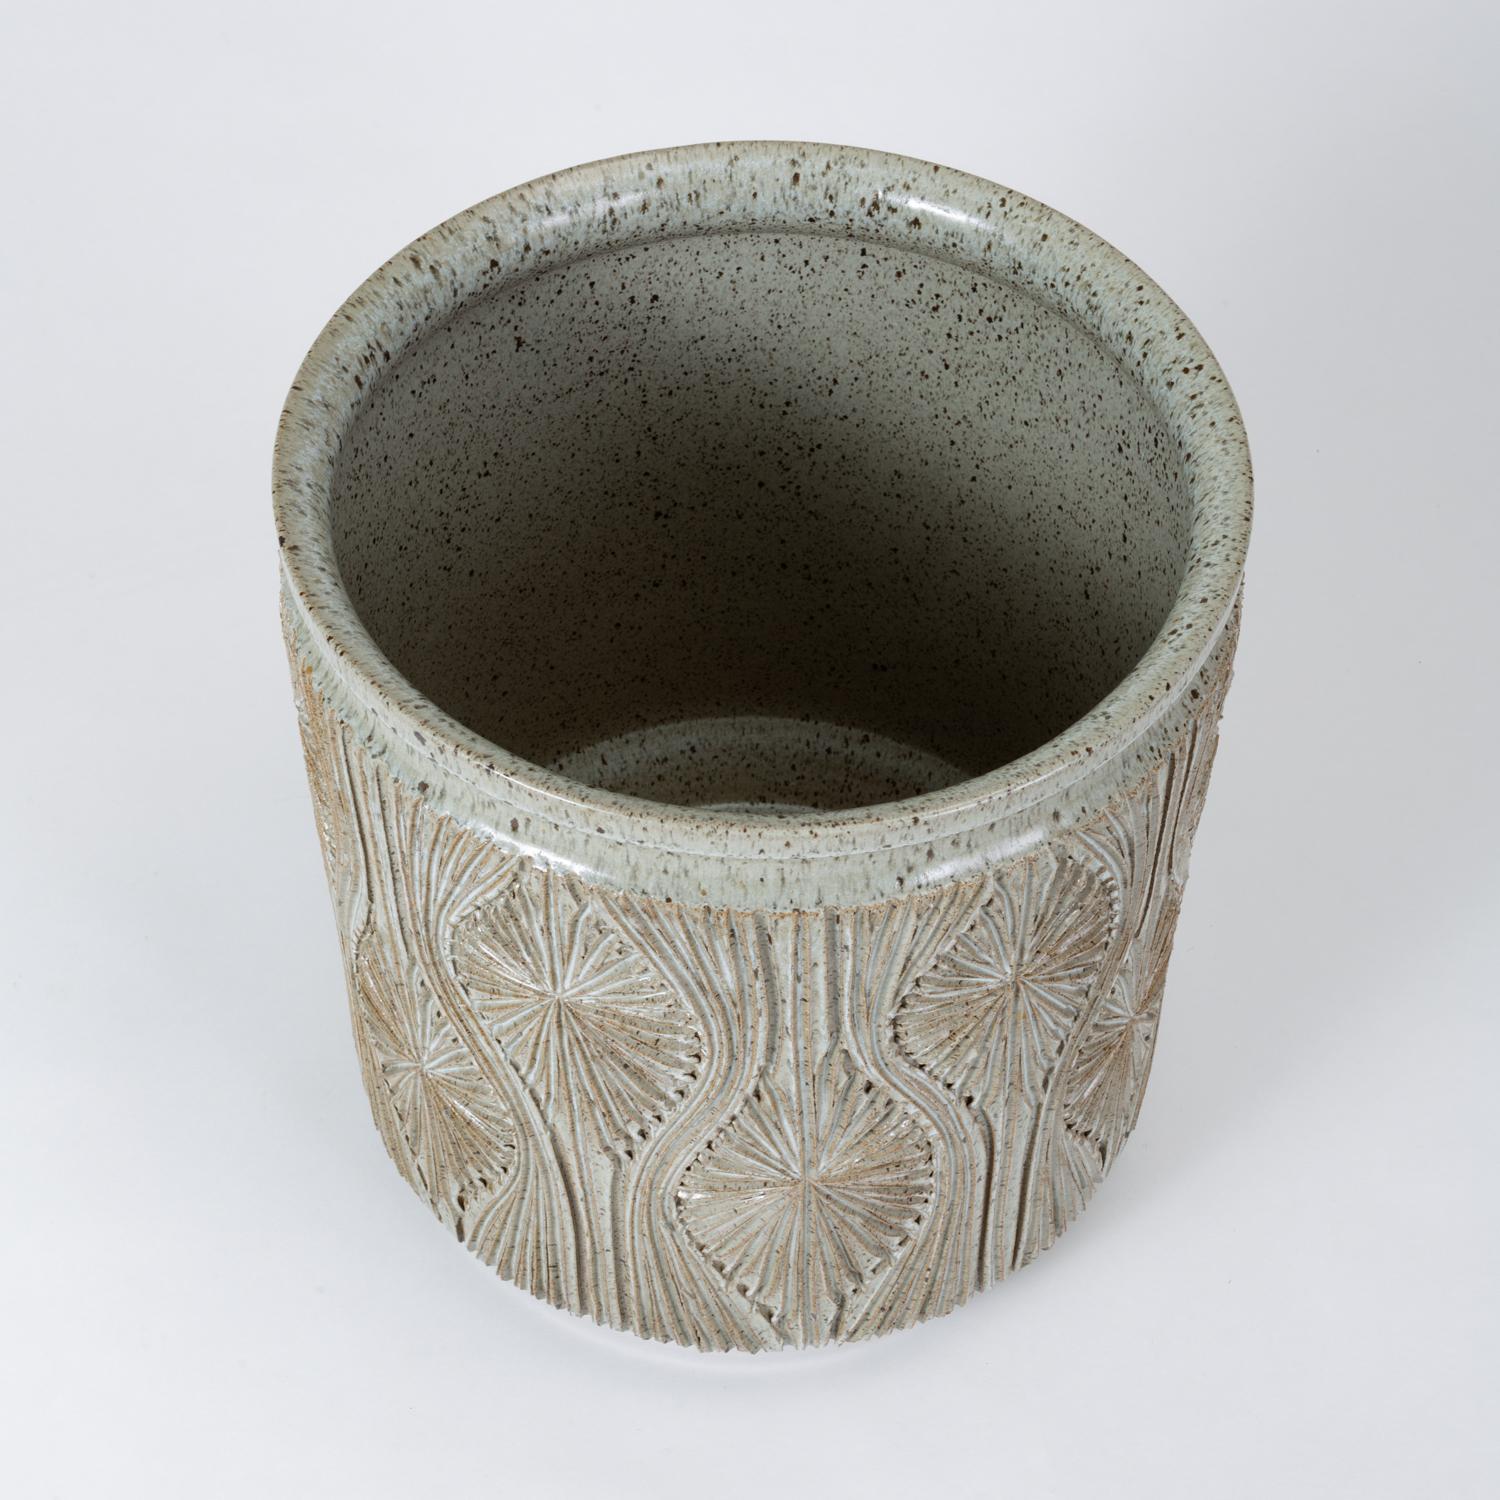 Single Gray-Glazed Earthgender Planter by David Cressey and Robert Maxwell 2